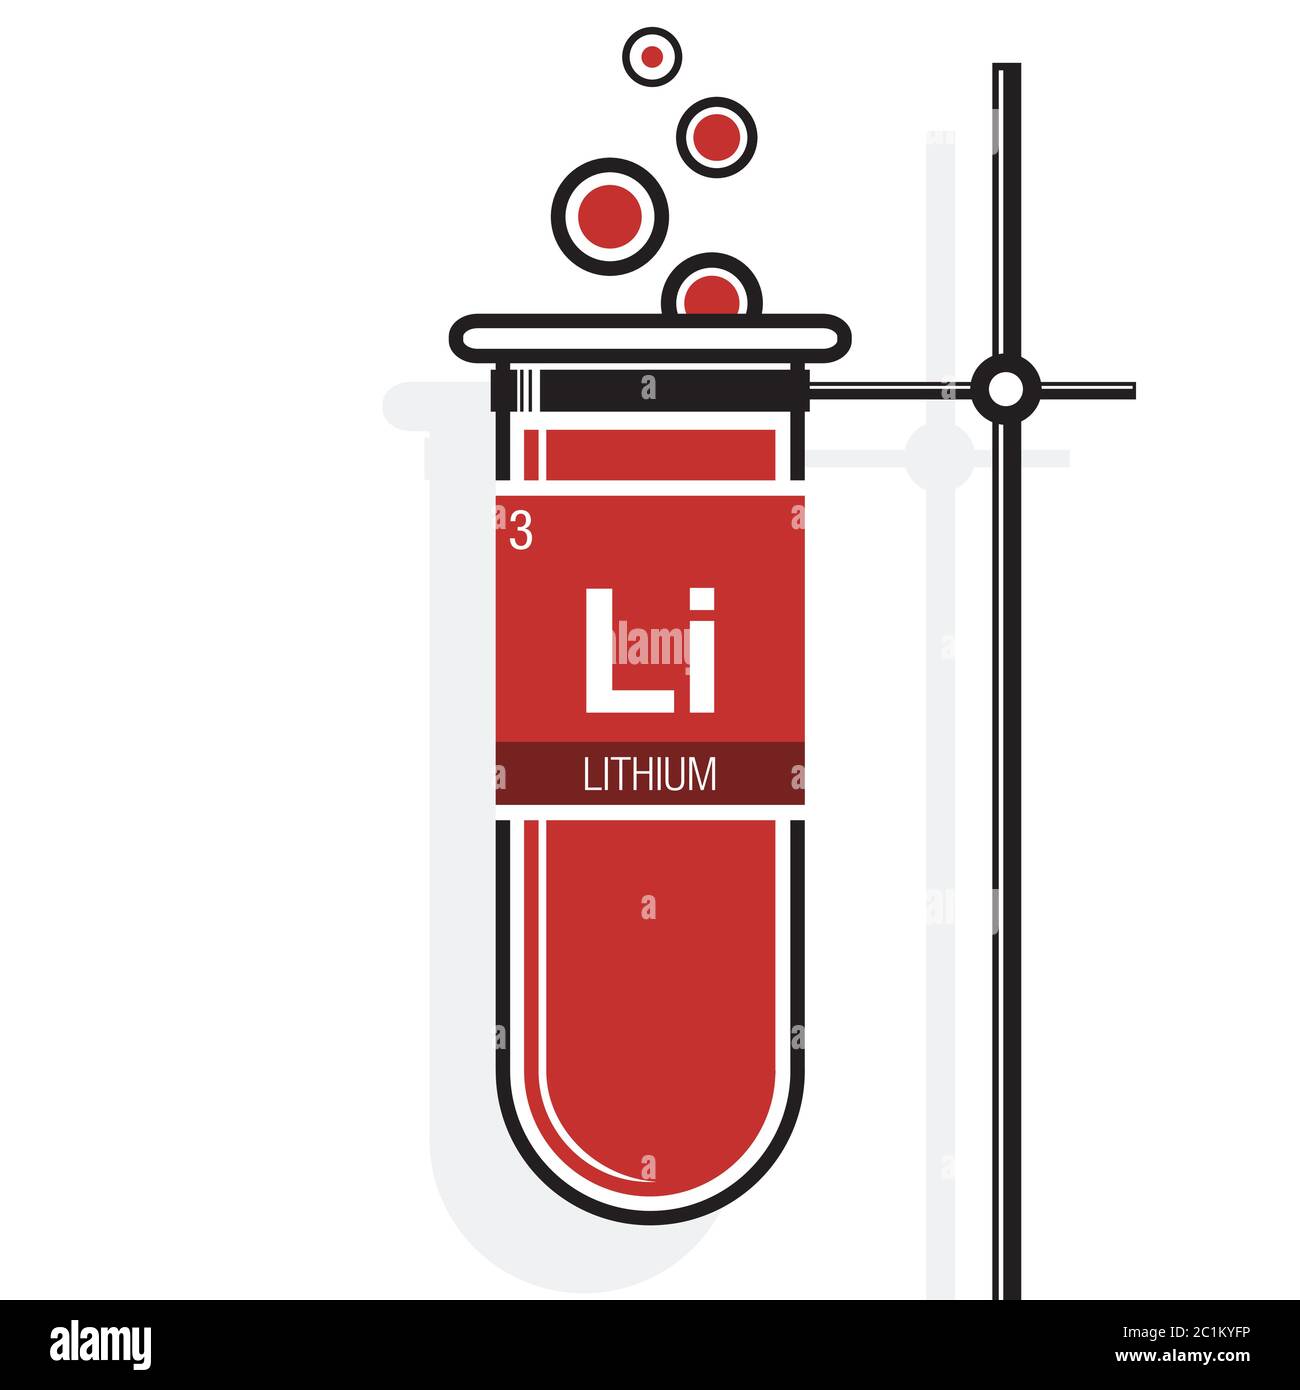 Lithium symbol on label in a red test tube with holder. Element number 3 of the Periodic Table of the Elements - Chemistry Stock Vector